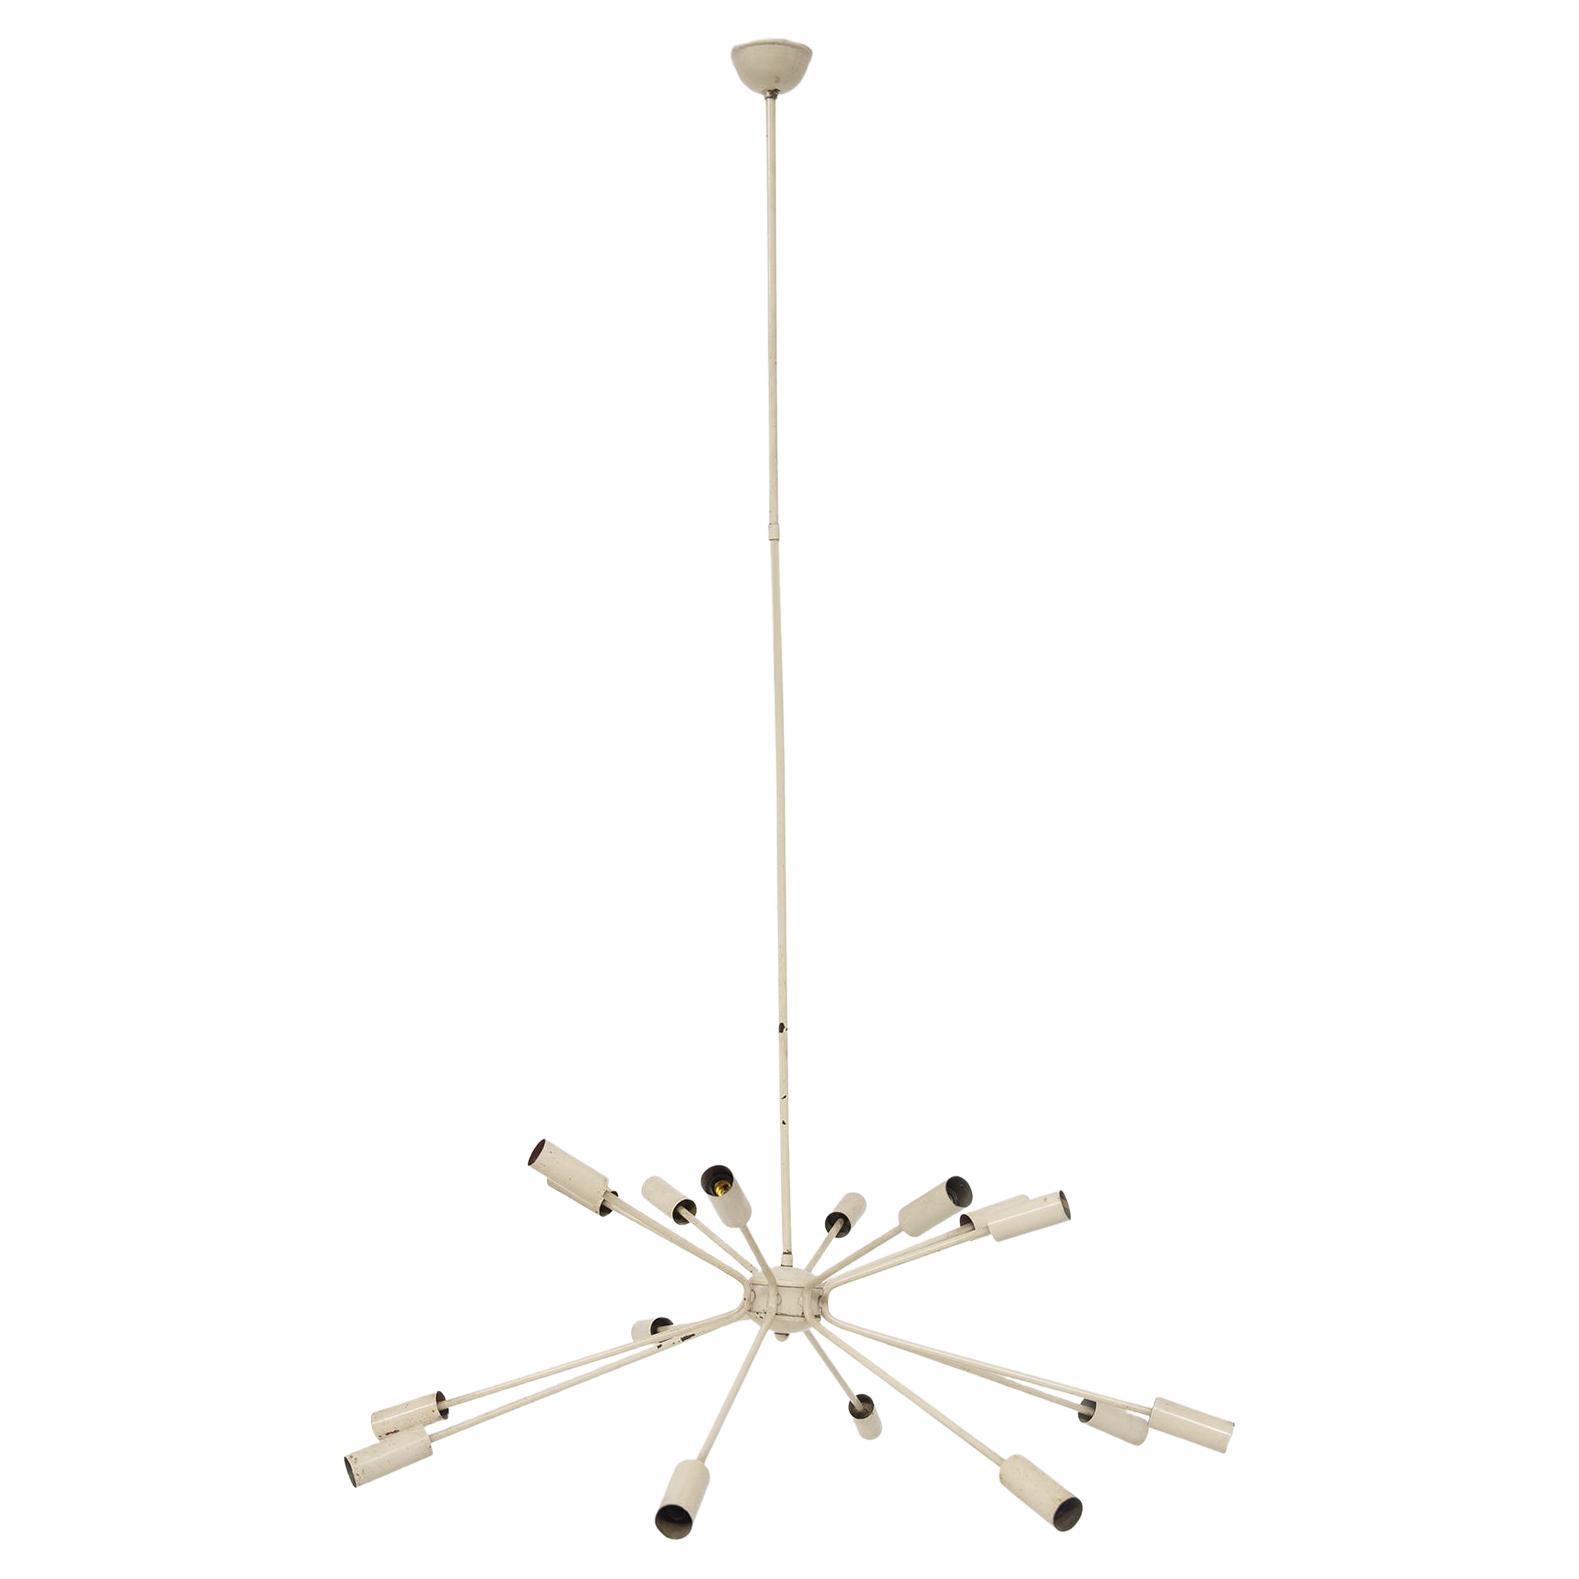 Rare Vintage Chandelier by Gino Sarfatti for ArteLuce, 1930s For Sale